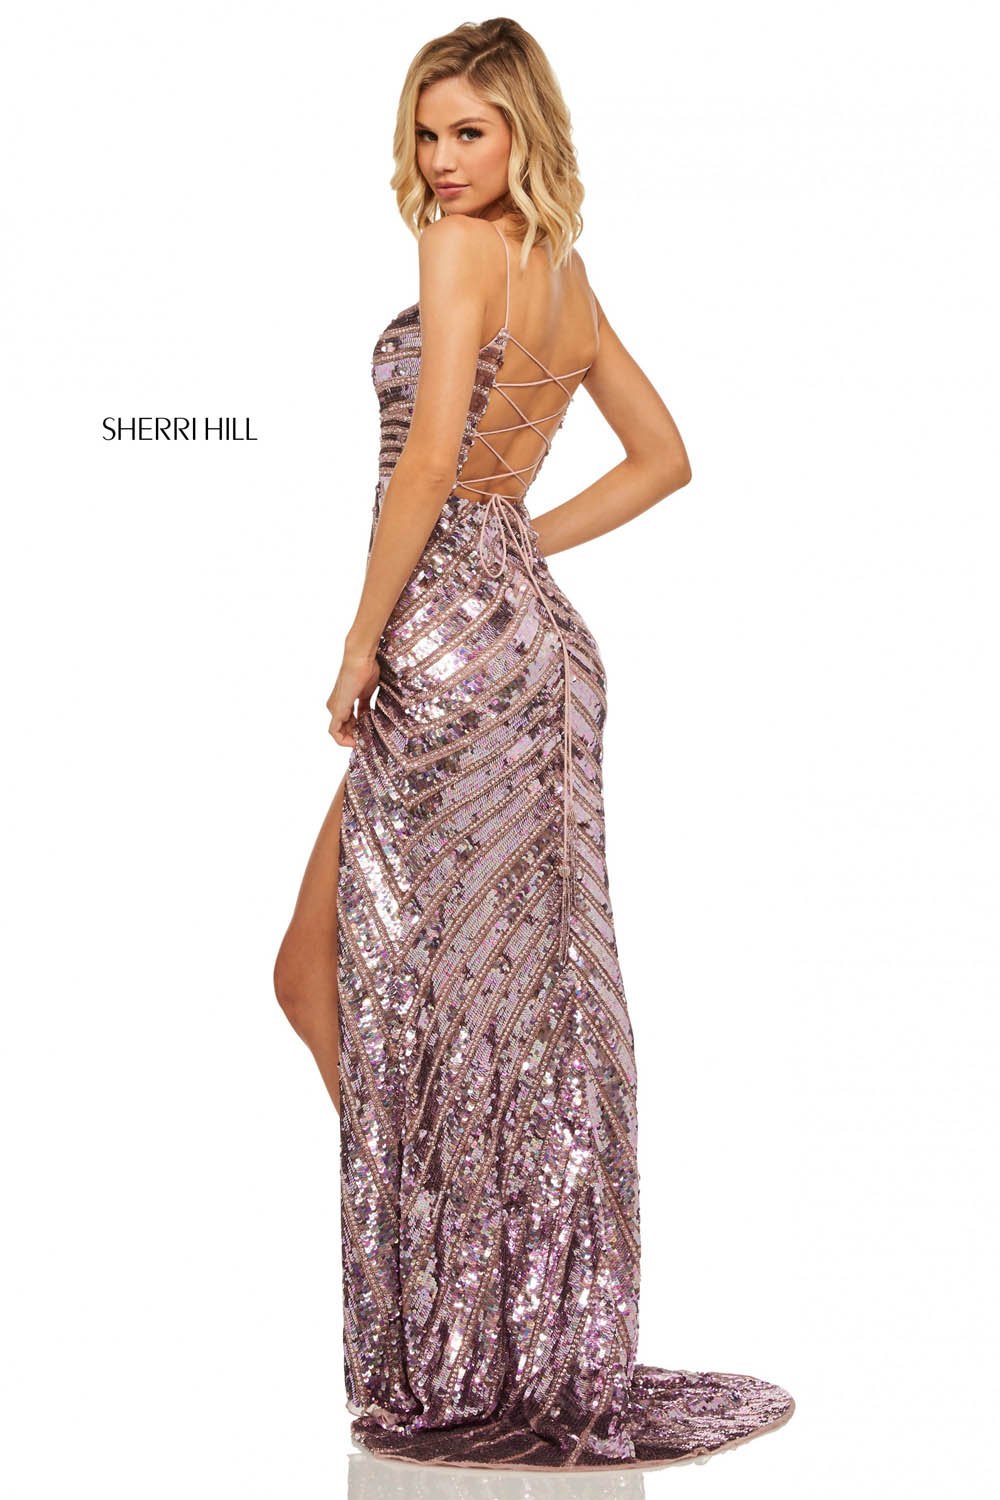 Sherri Hill 52558 dress images in these colors: Burgundy, Black, Rose Gold, Emerald, Silver, Gold, Pink, Light Blue, Light Gold, Light Yellow, Red, Navy.